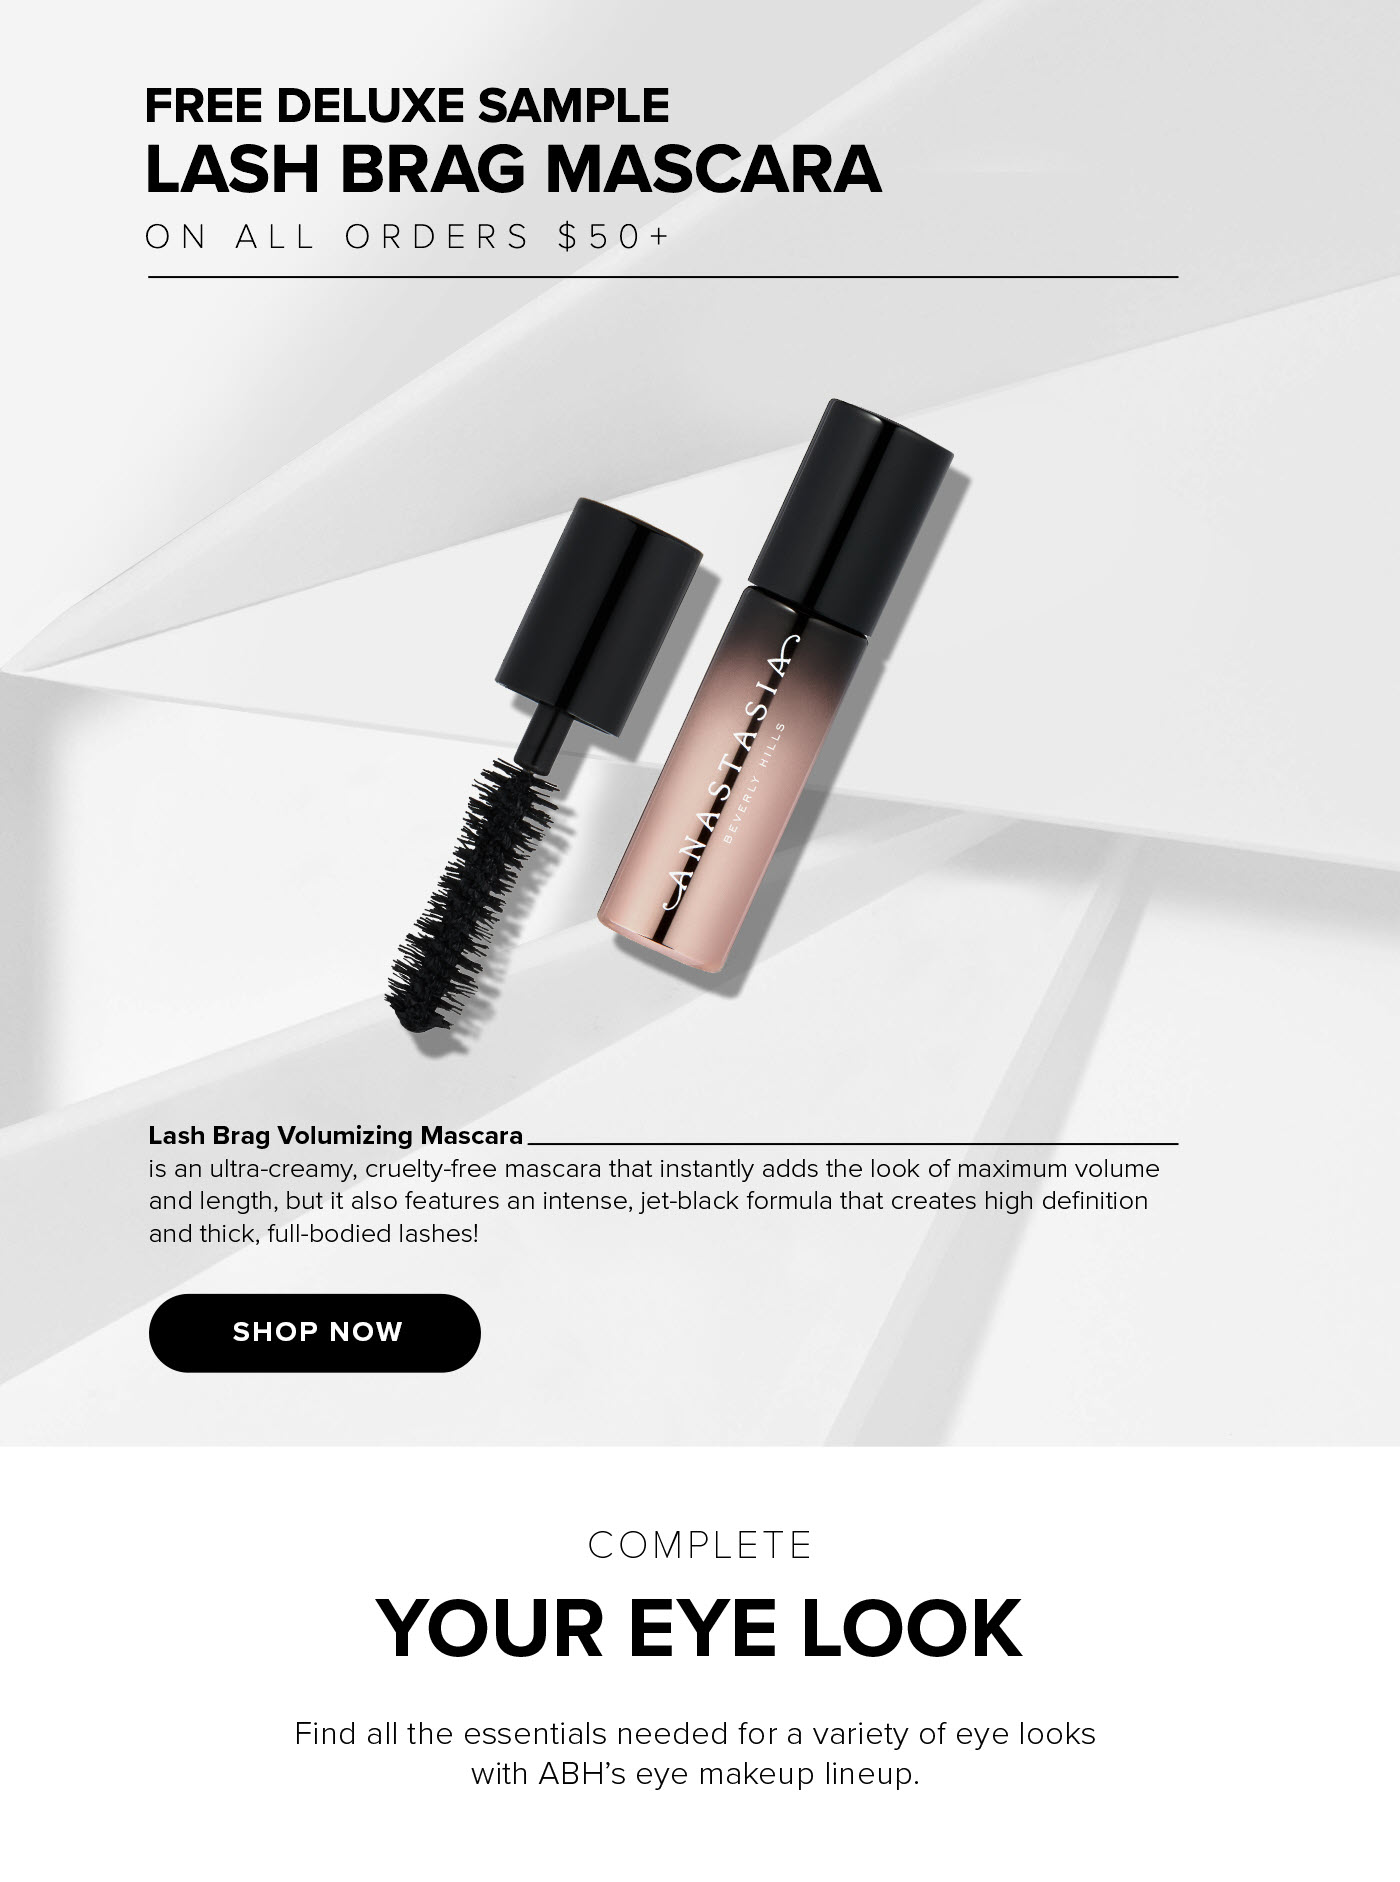 Free Deluxe Sample Lash Brag Mascara on All Orders $50+ - Shop Now